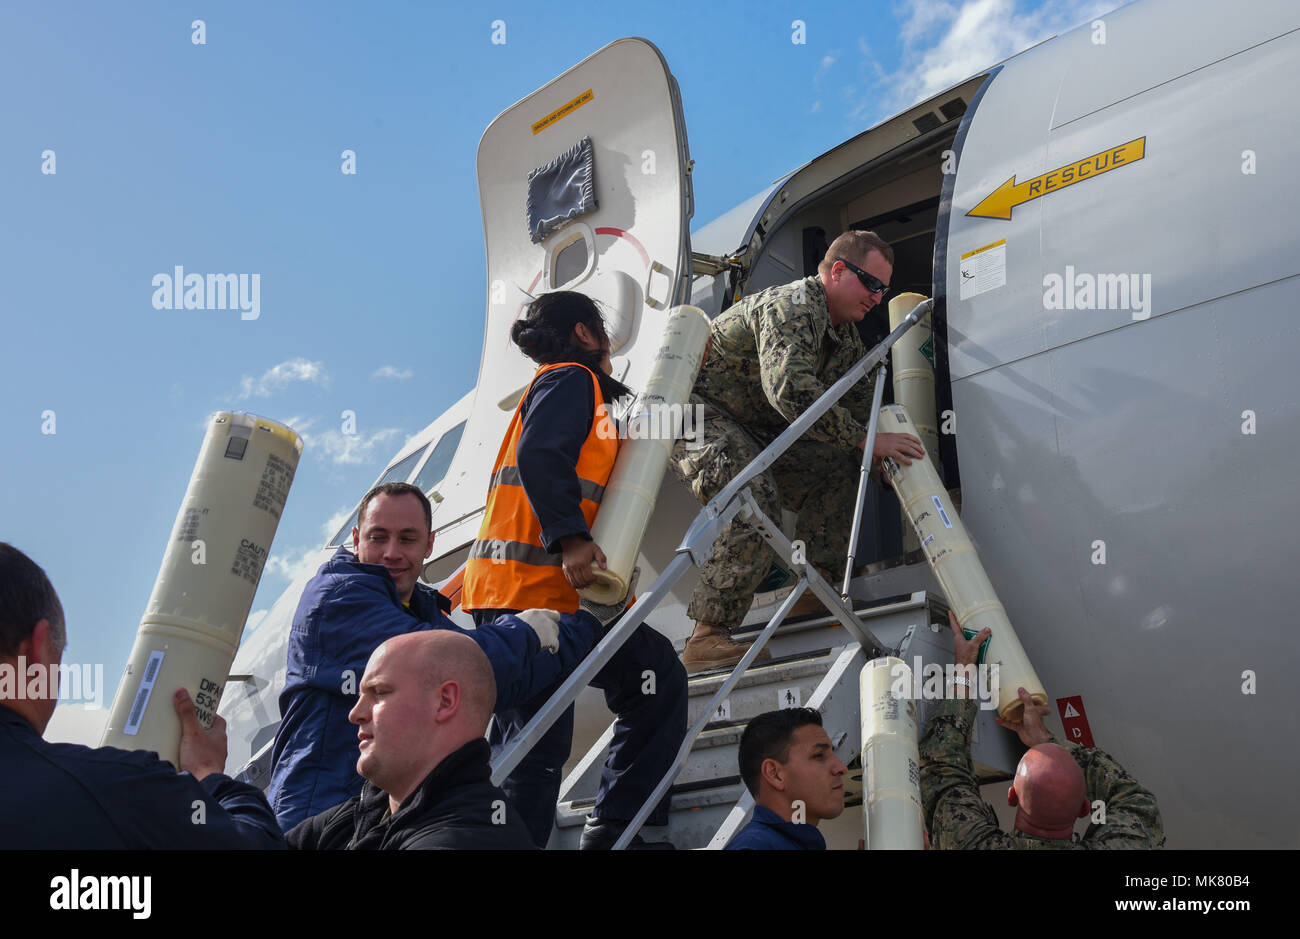 171124 N It277 039 Bahia Blanca Argentina Nov 23 2017 Members Of The Argentine Navy Help Sailors From The Mad Foxes Of Patrol Squadron Vp 5 And The Pelicans Of Vp 45 Load Sonobouys Onto A